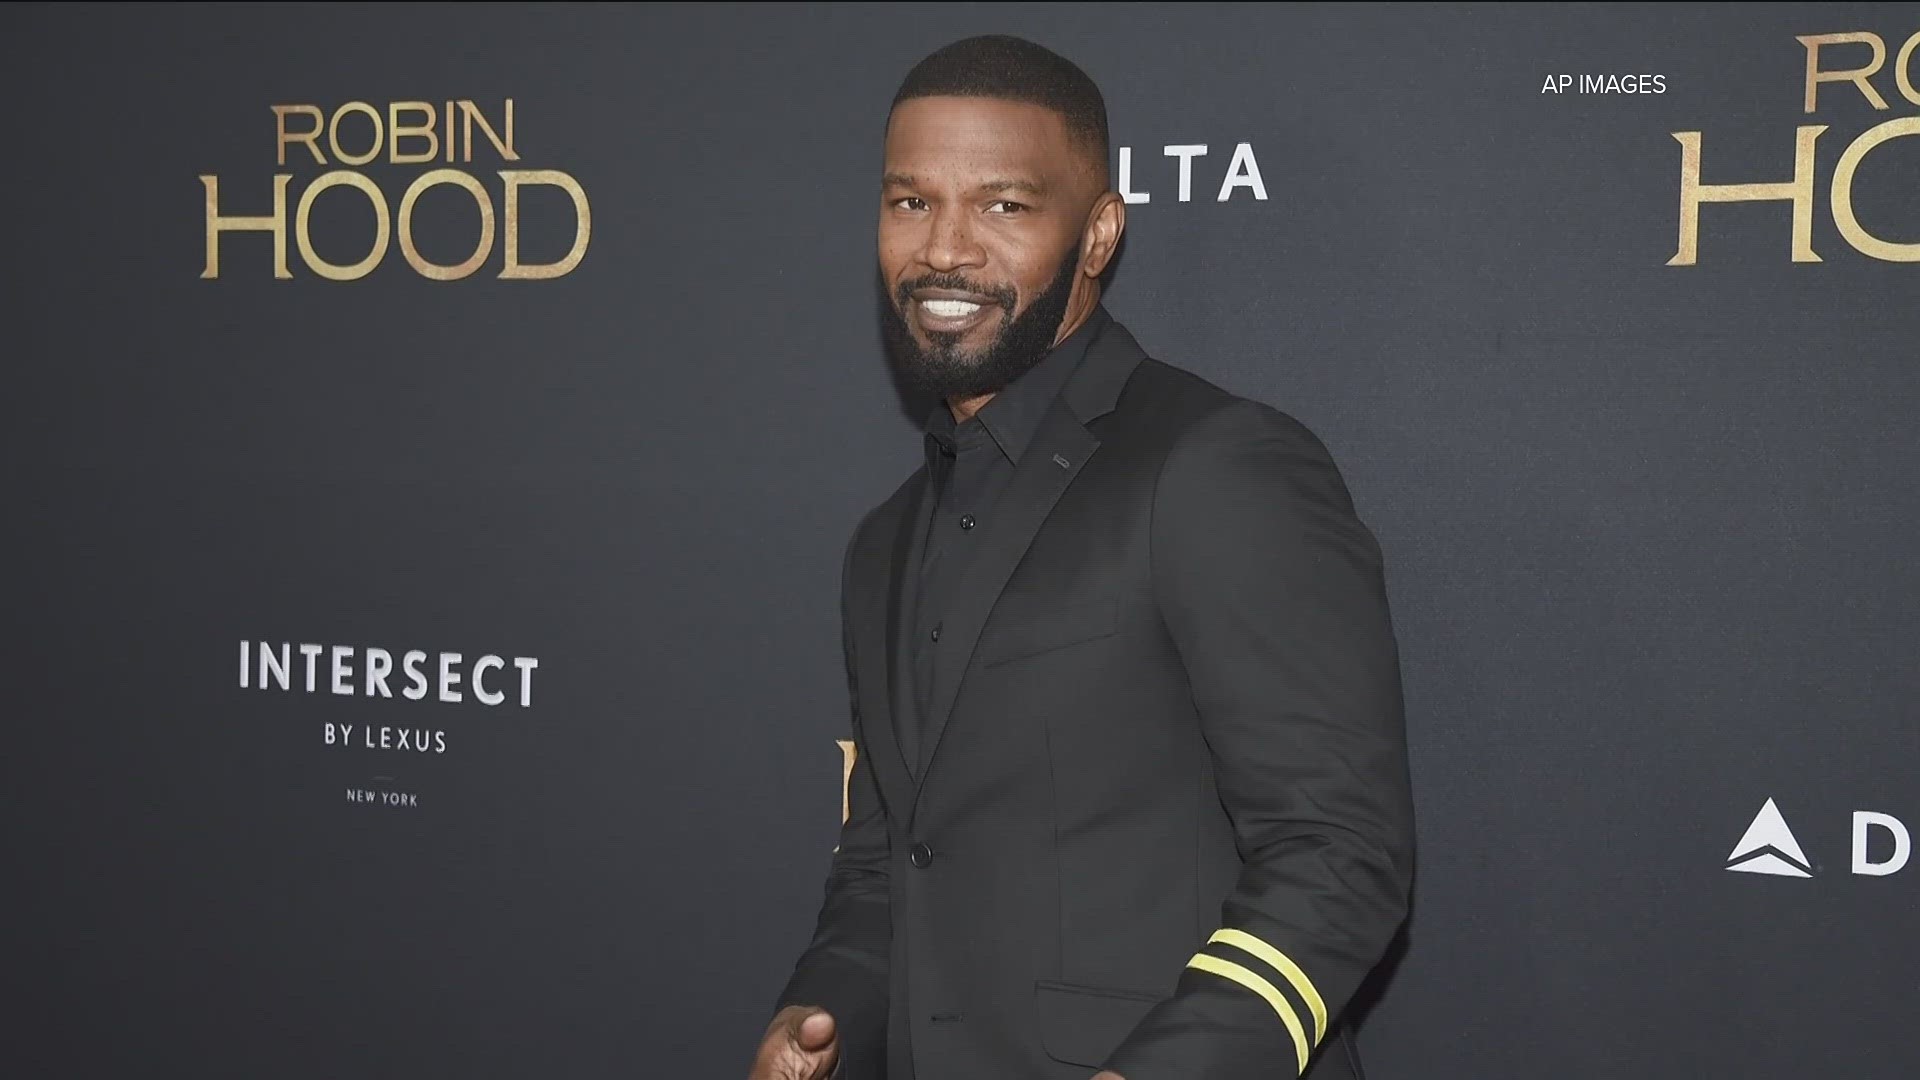 Jamie Foxx is awake, alert and his condition is improving.